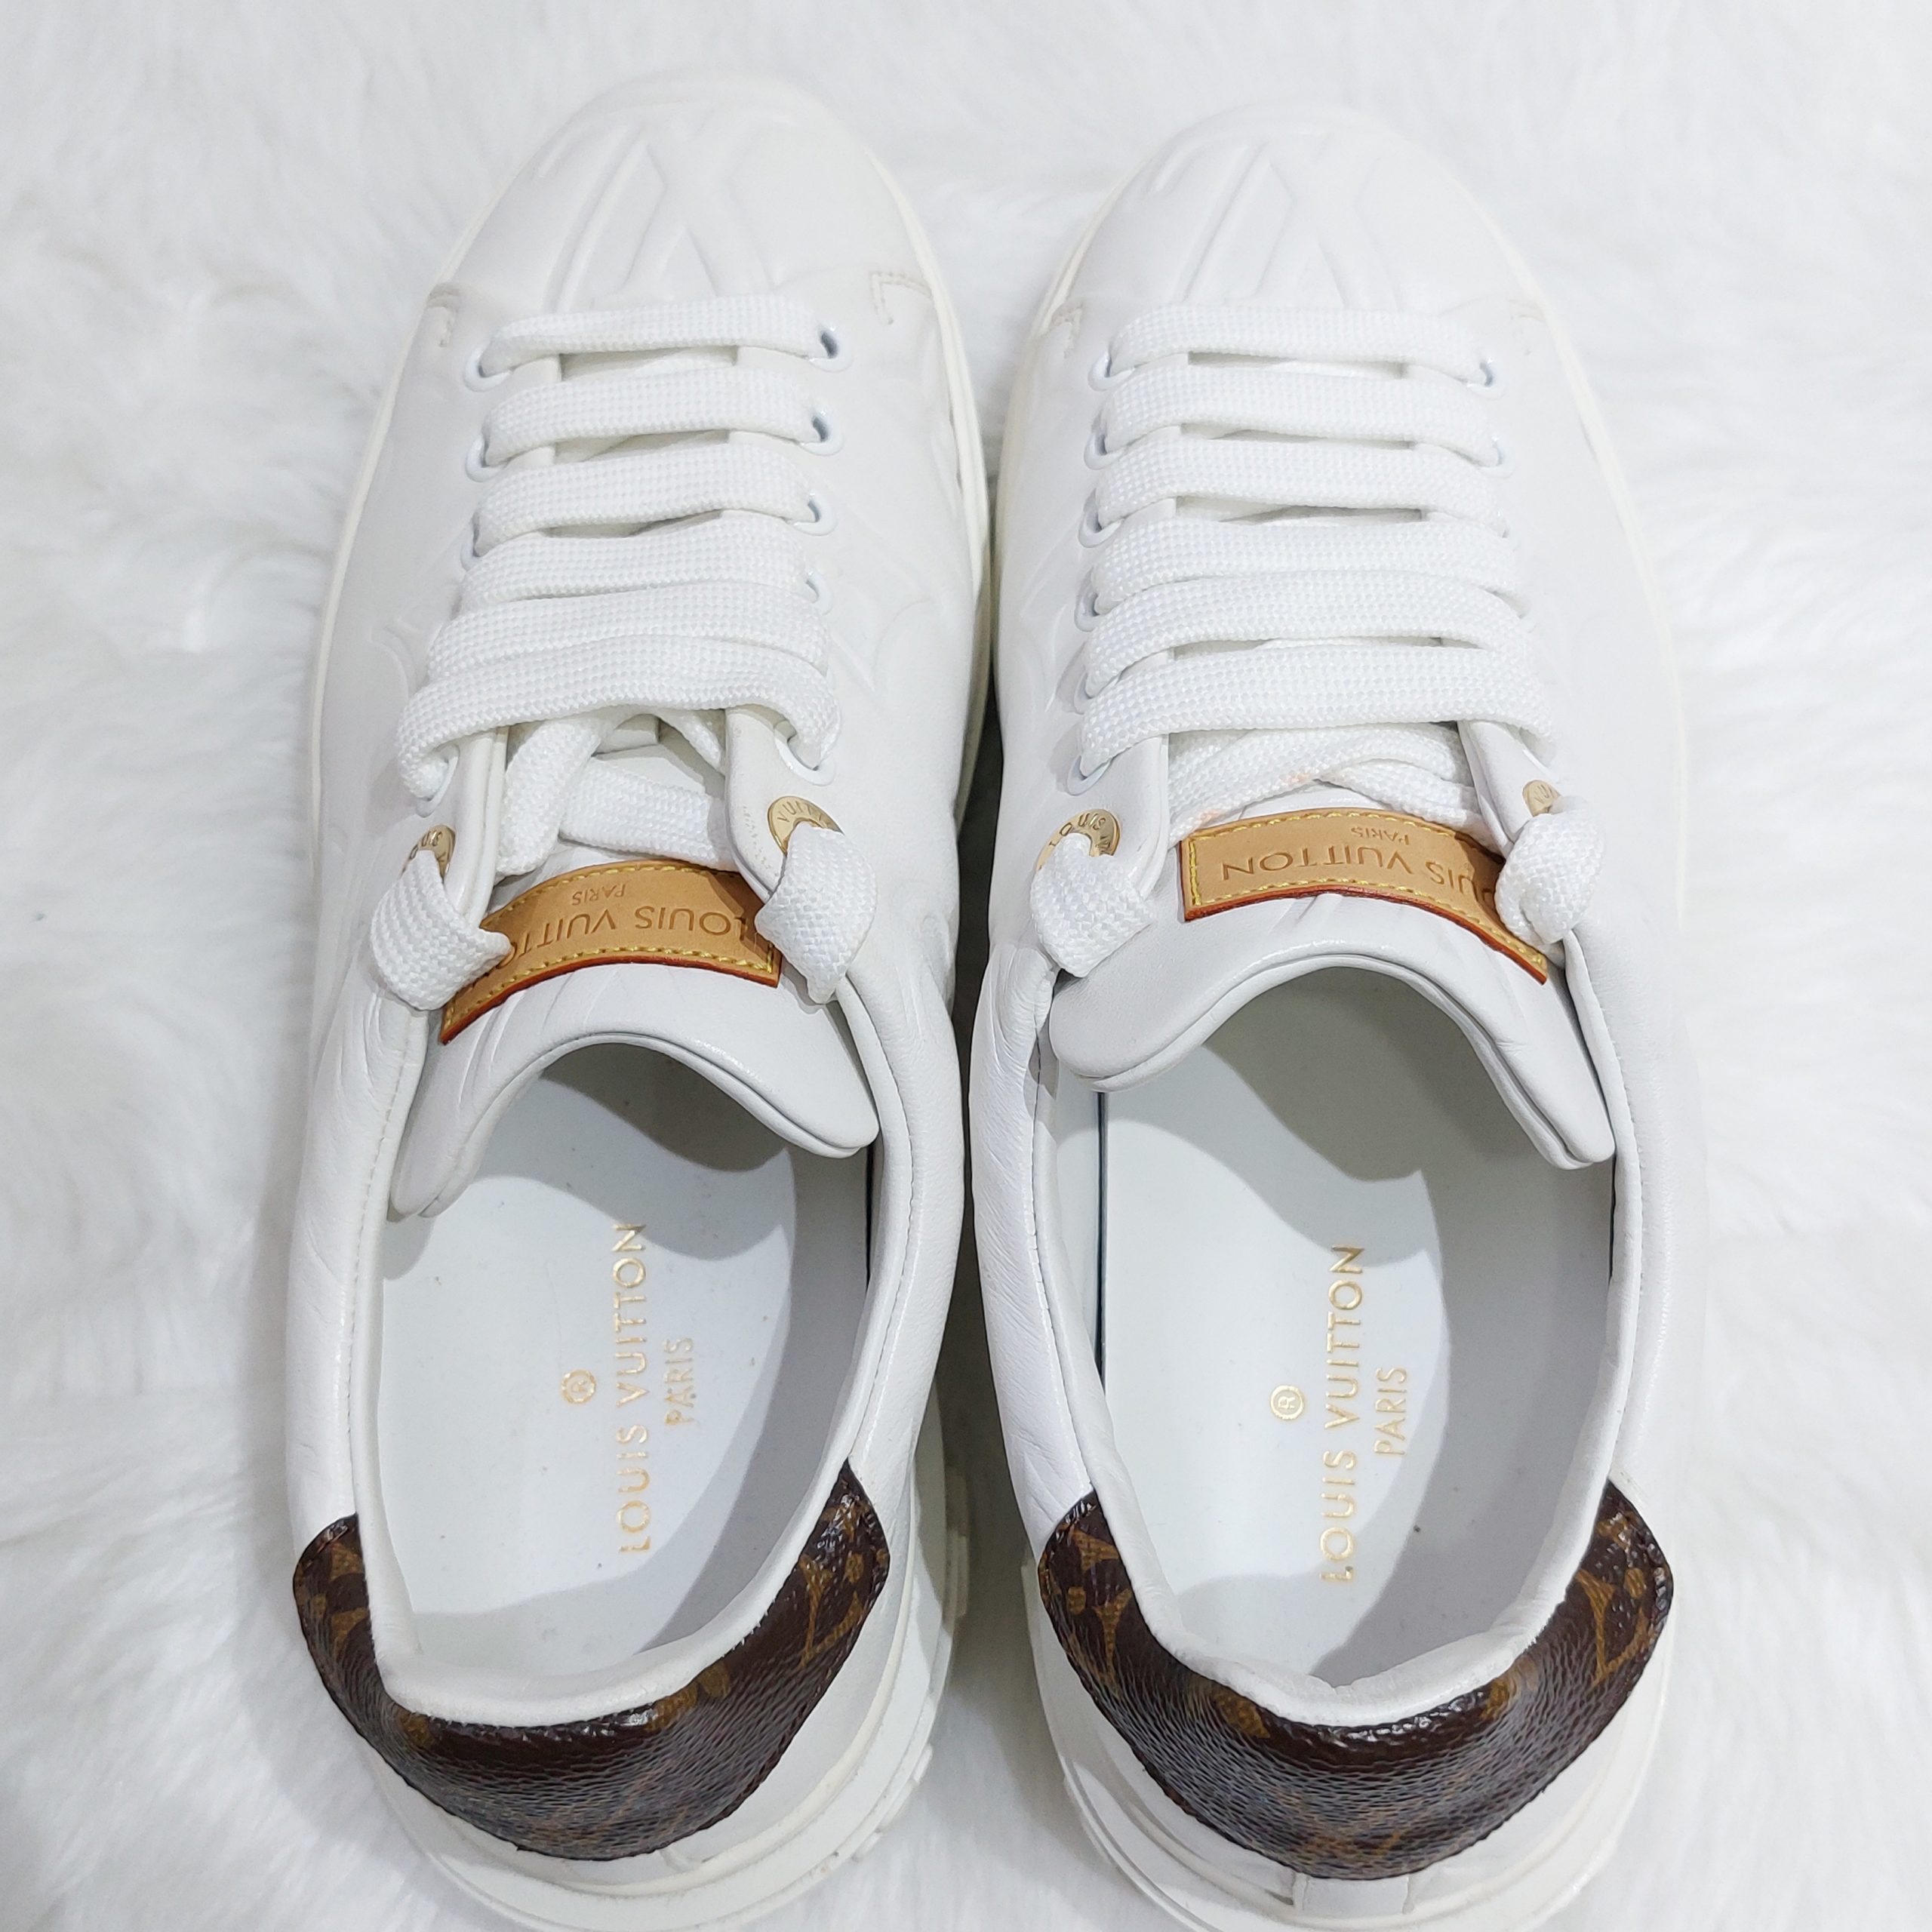 LOUIS VUITTON Lambskin Embossed Monogram Time Out Sneakers 37.5 White  1296670